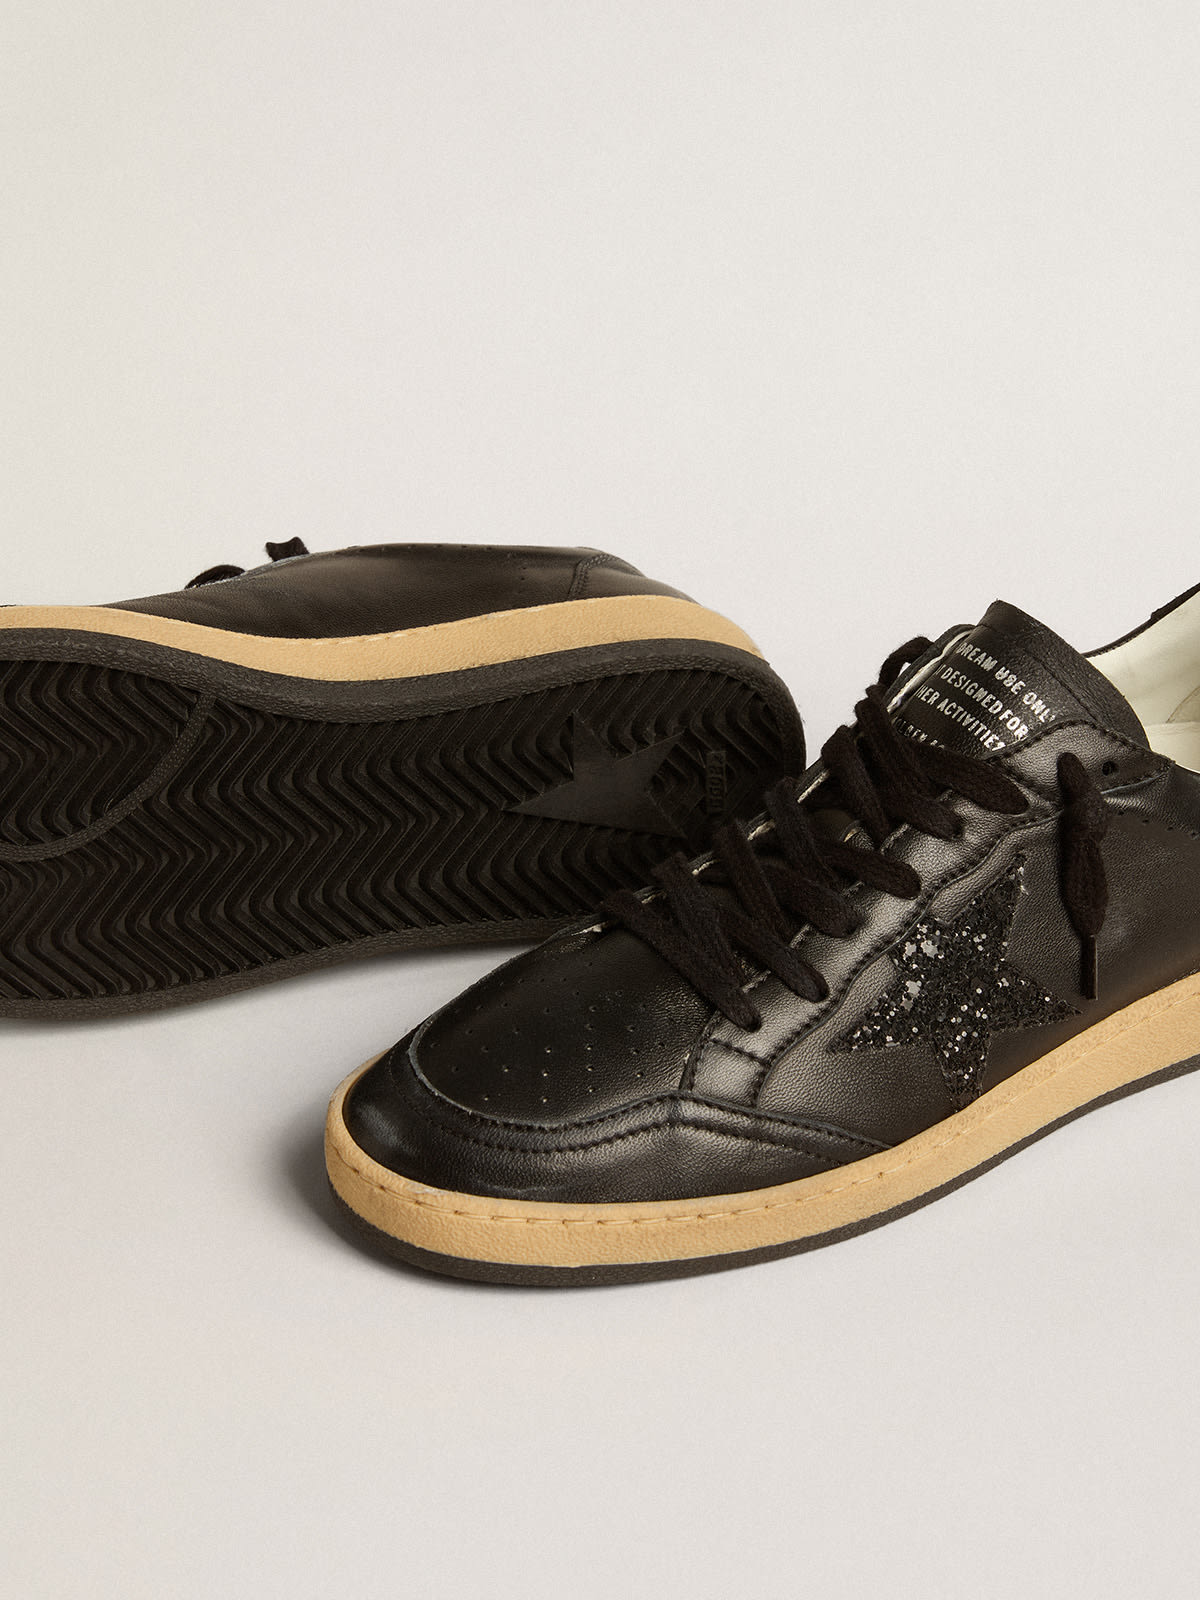 Golden Goose - Ball Star in black nappa leather with black glitter star and suede heel tab in 